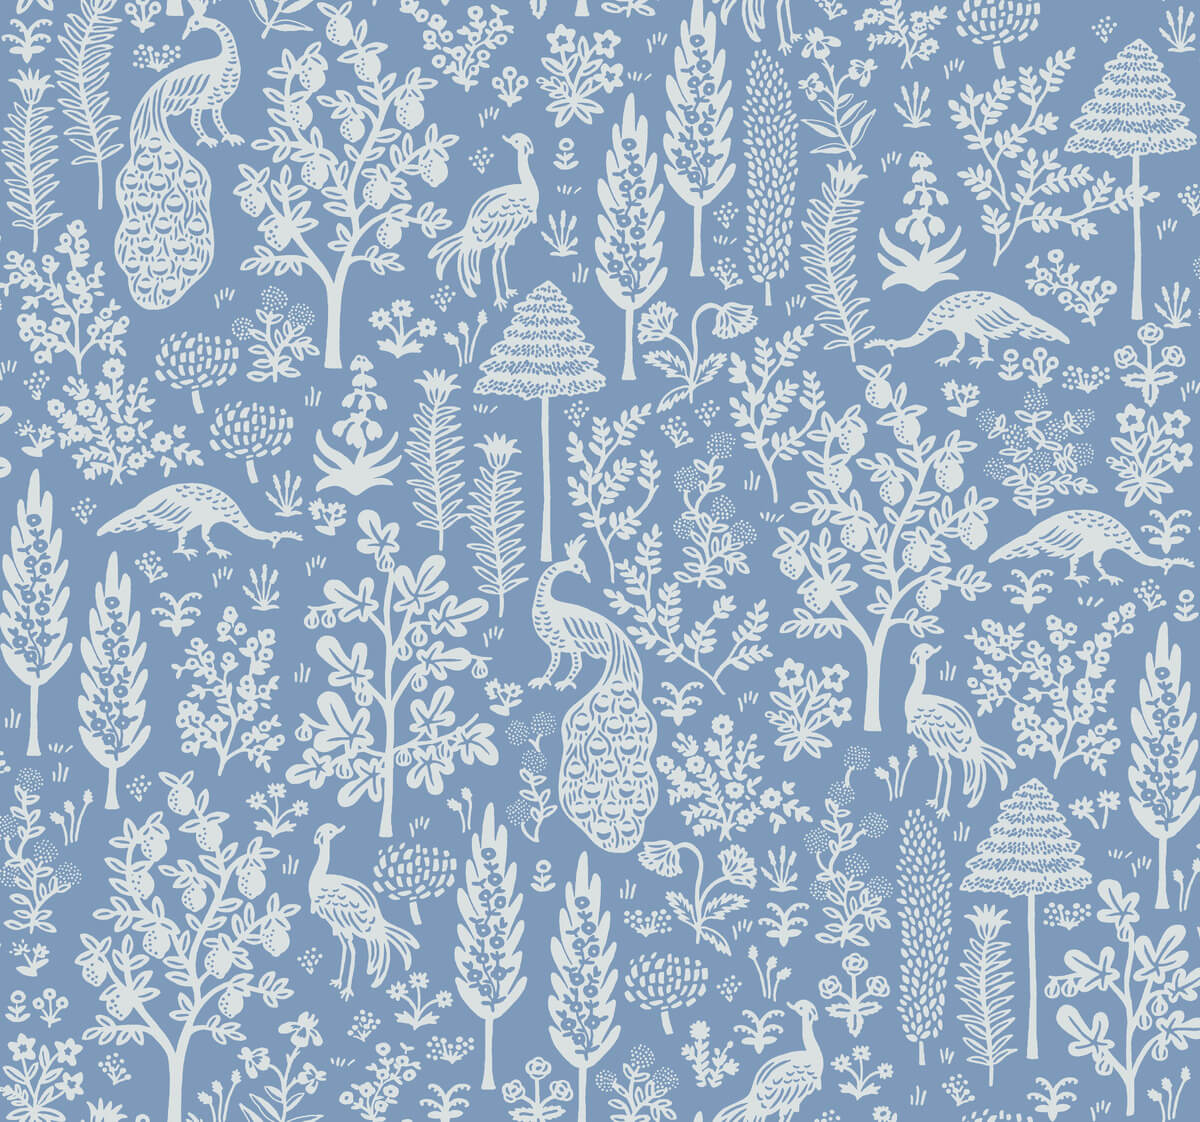 Rifle Paper Co. Second Edition Menagerie Toile Wallpaper - Blue